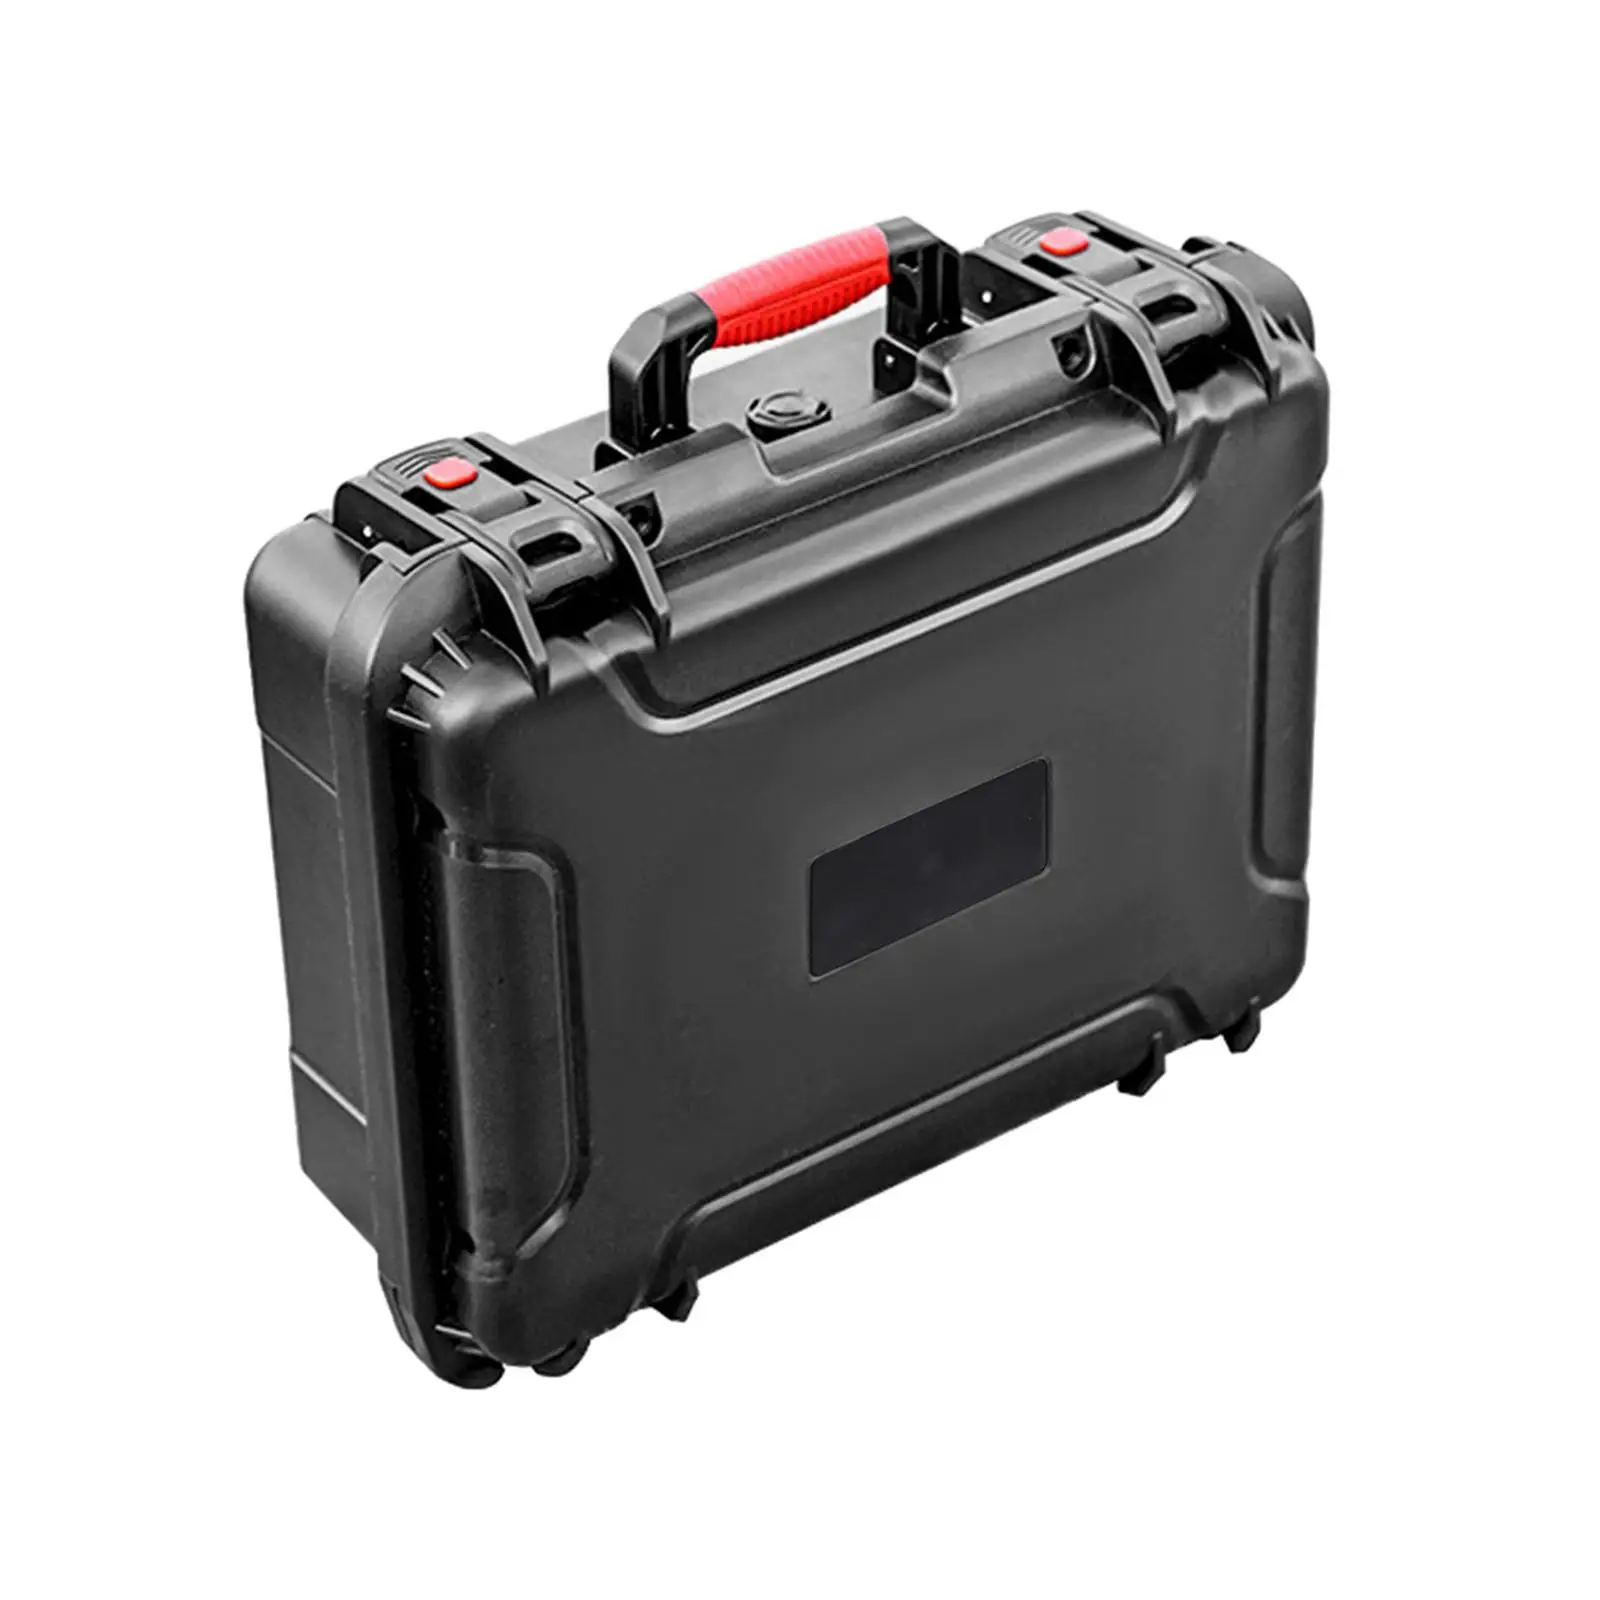 Hard Case Drone Body Storage Shockproof Travel Carry Case IP67 Waterproof RC Drone Suitcase Case for Air 3 Drone and Accessories